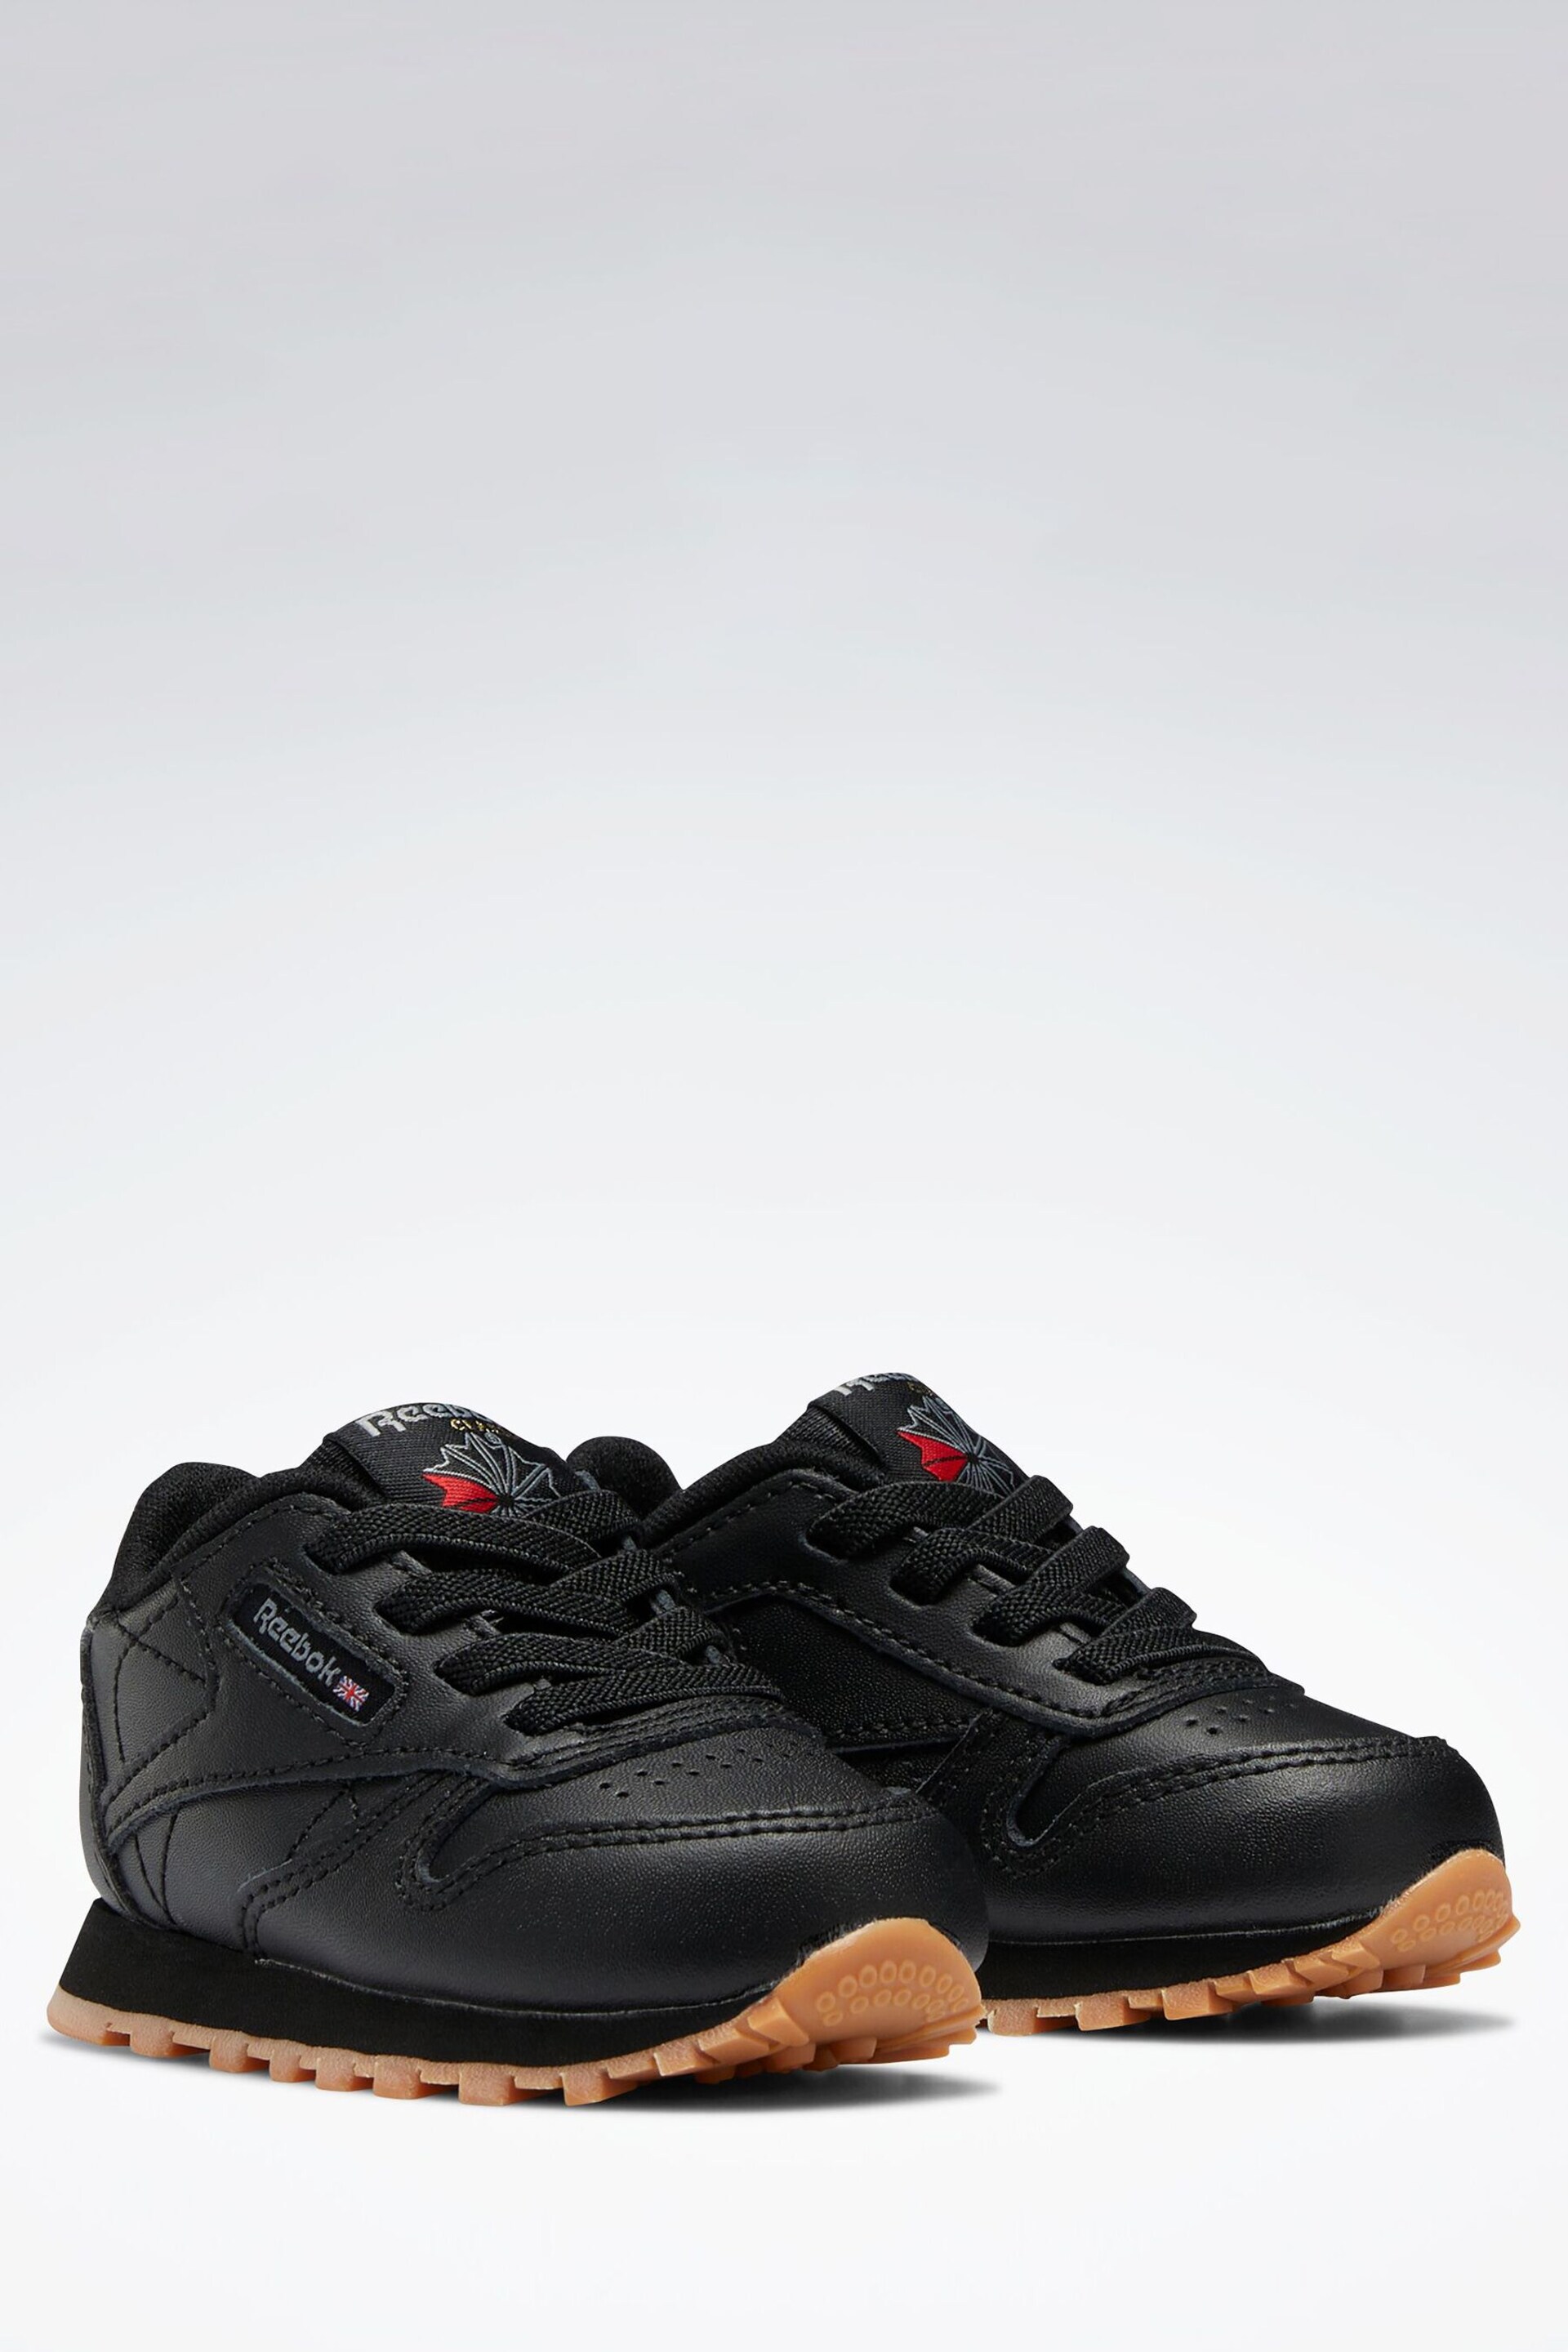 Reebok Classic Leather Black Shoes - Image 2 of 5